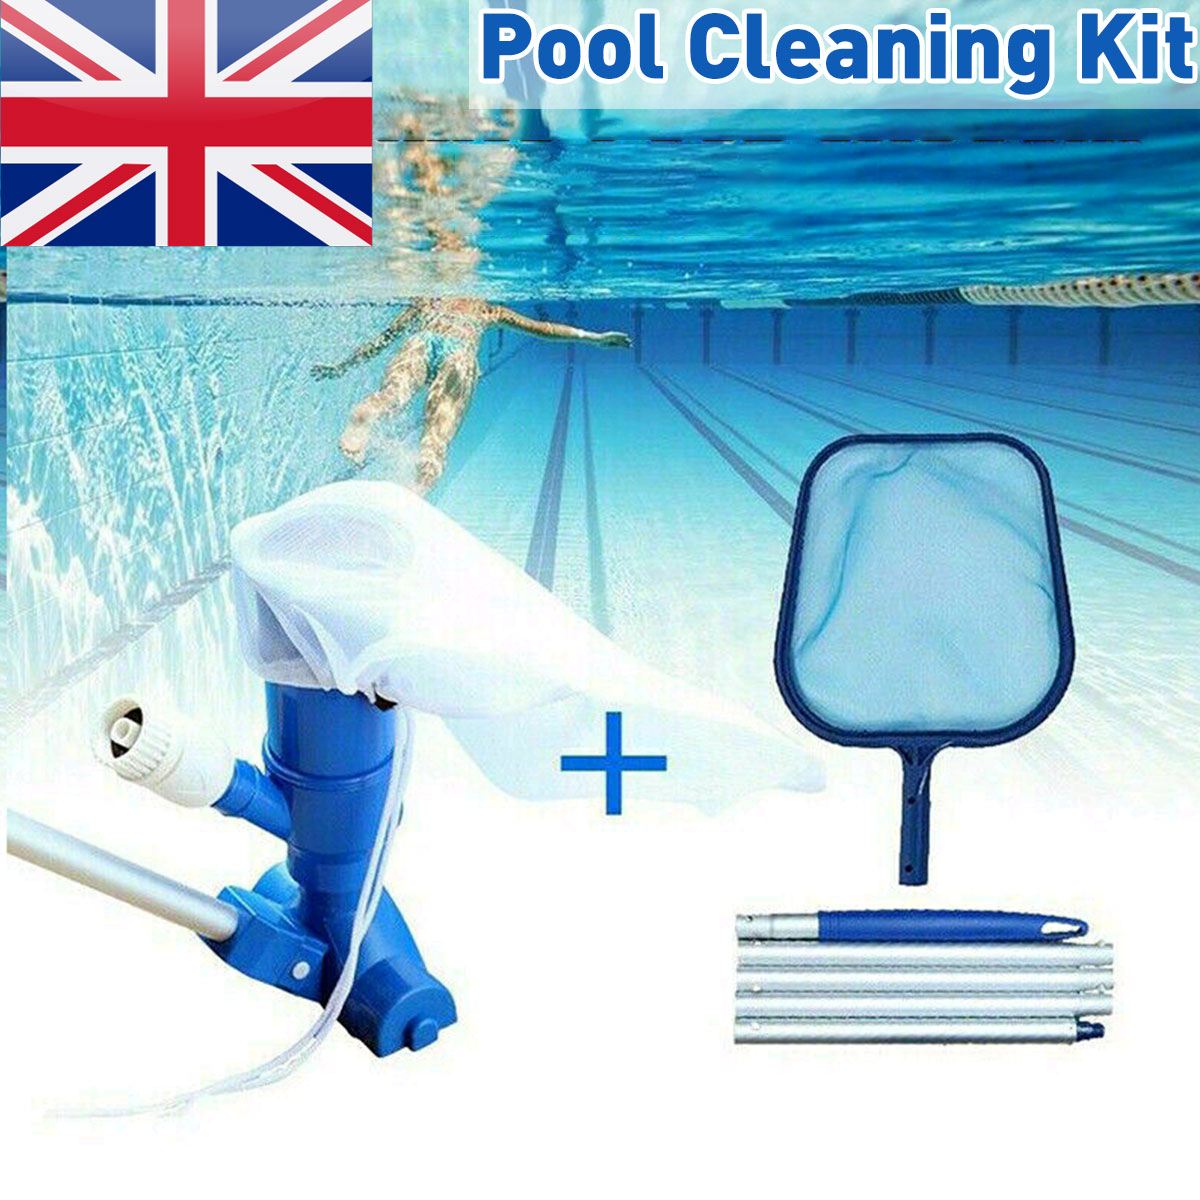 Pool-Water-Cleaning-Kit-Swimming-Vacuum-Cleaner-Leaf-Skimmer-Tool-Set-Removable-Tools-1723776-1